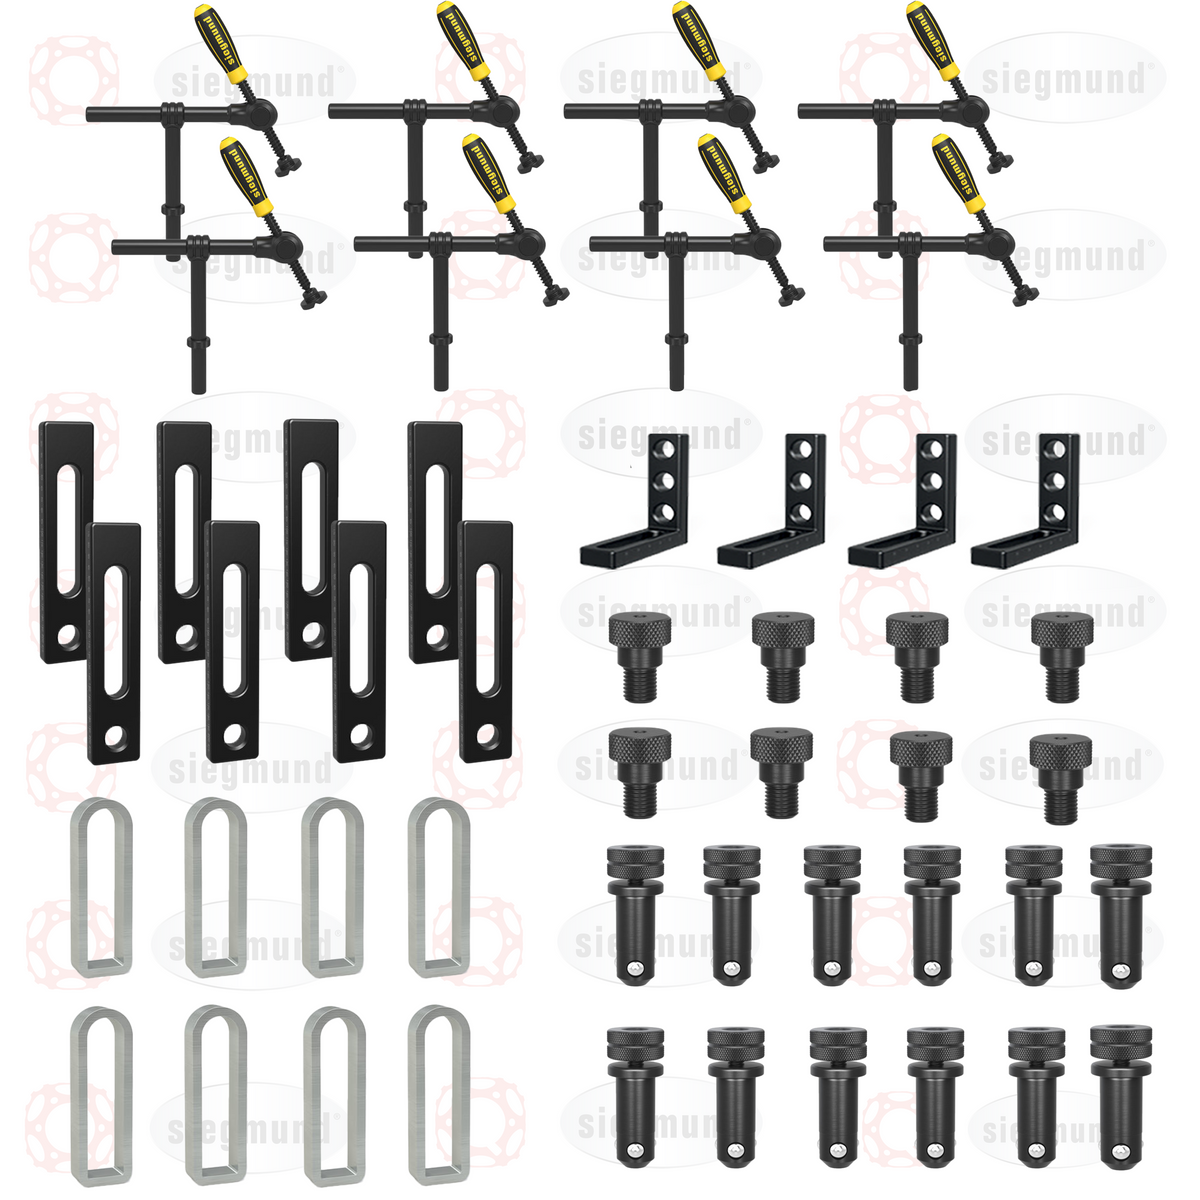 US281300: System 28 BASIC Imperial Series Set 2, 54 Piece Accessory Kit